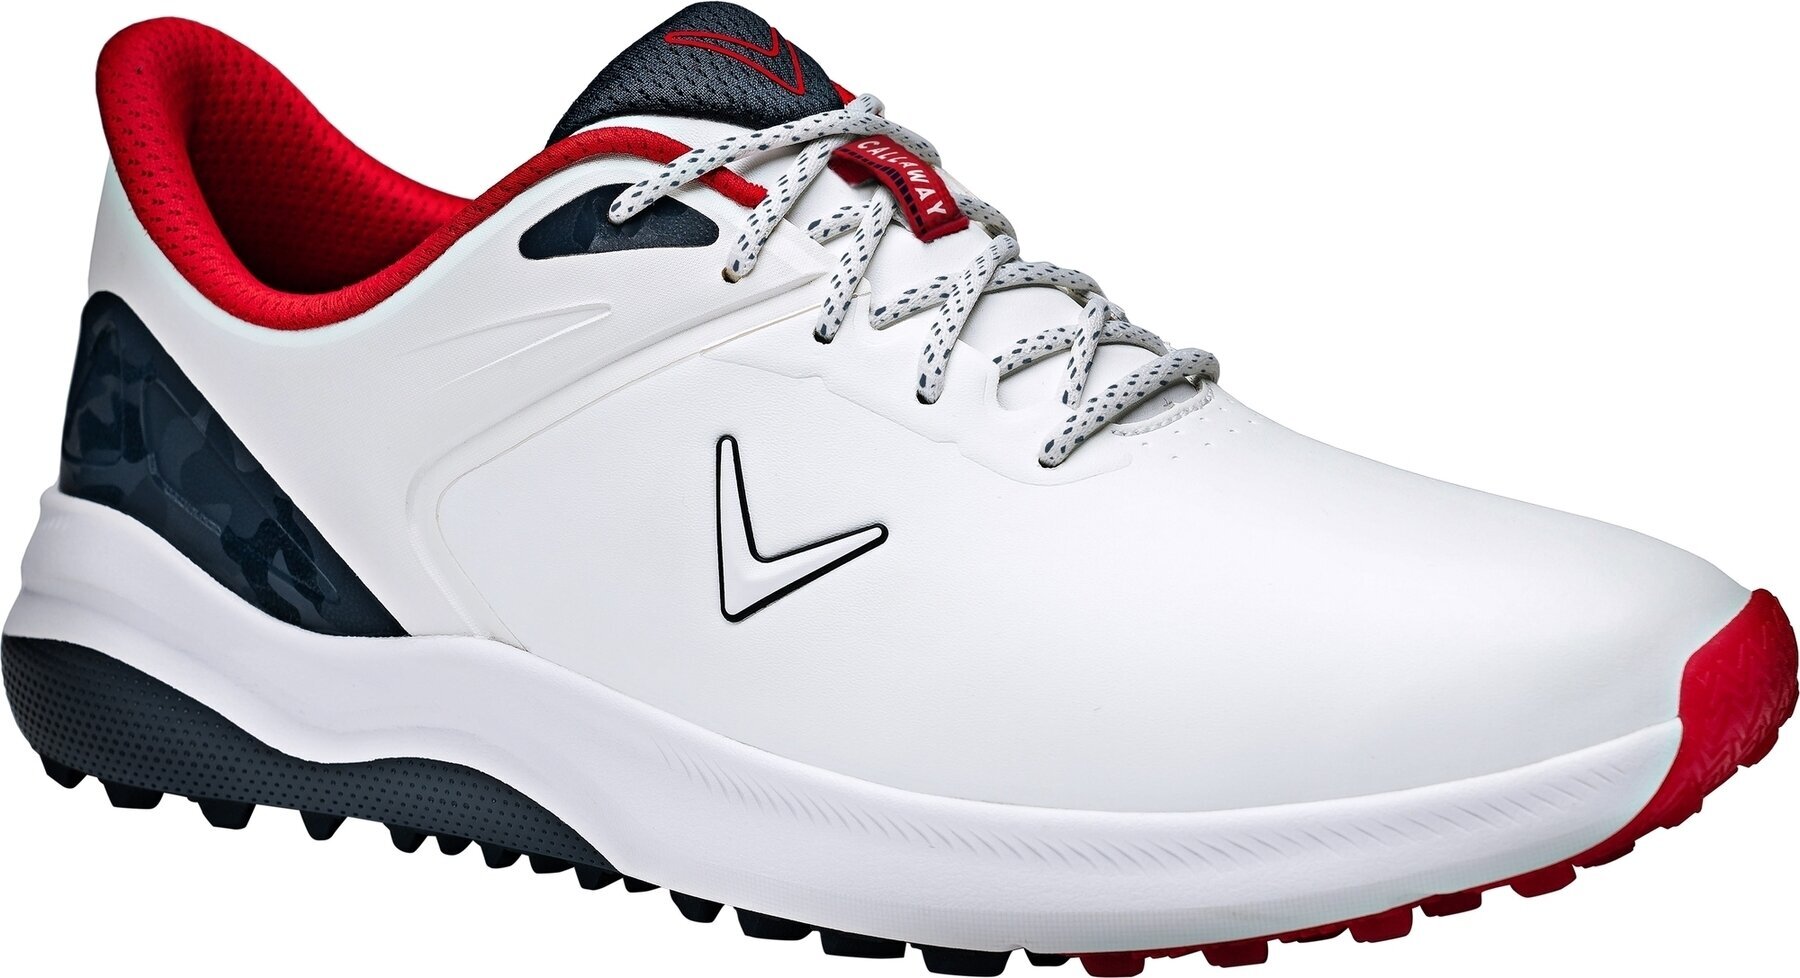 Men's golf shoes Callaway Lazer Mens Golf Shoes White/Navy/Red 41